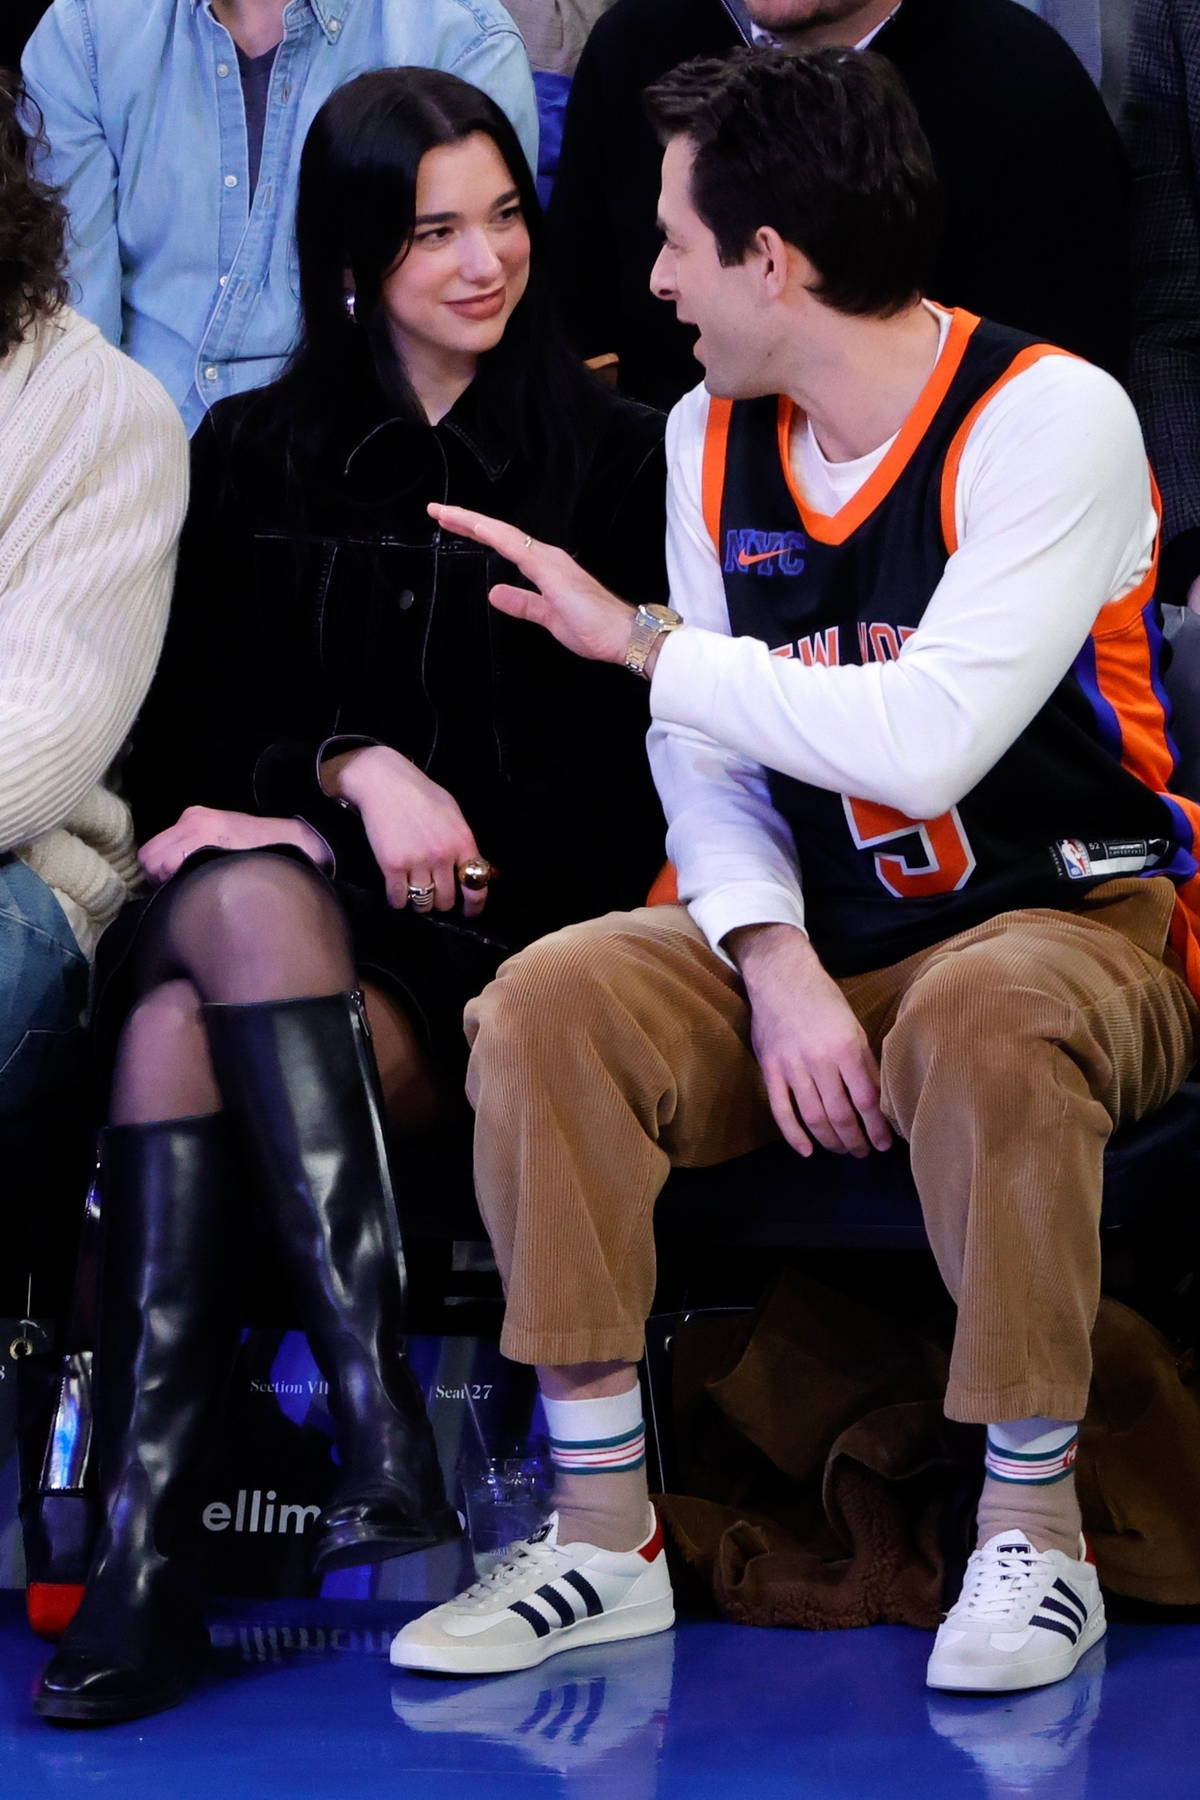 https://www.celebsfirst.com/wp-content/uploads/2023/03/dua-lipa-looks-stylish-in-all-black-denim-outfit-while-attending-the-charlotte-hornets-vs-new-york-knicks-game-in-new-york-city-070323_8.jpg